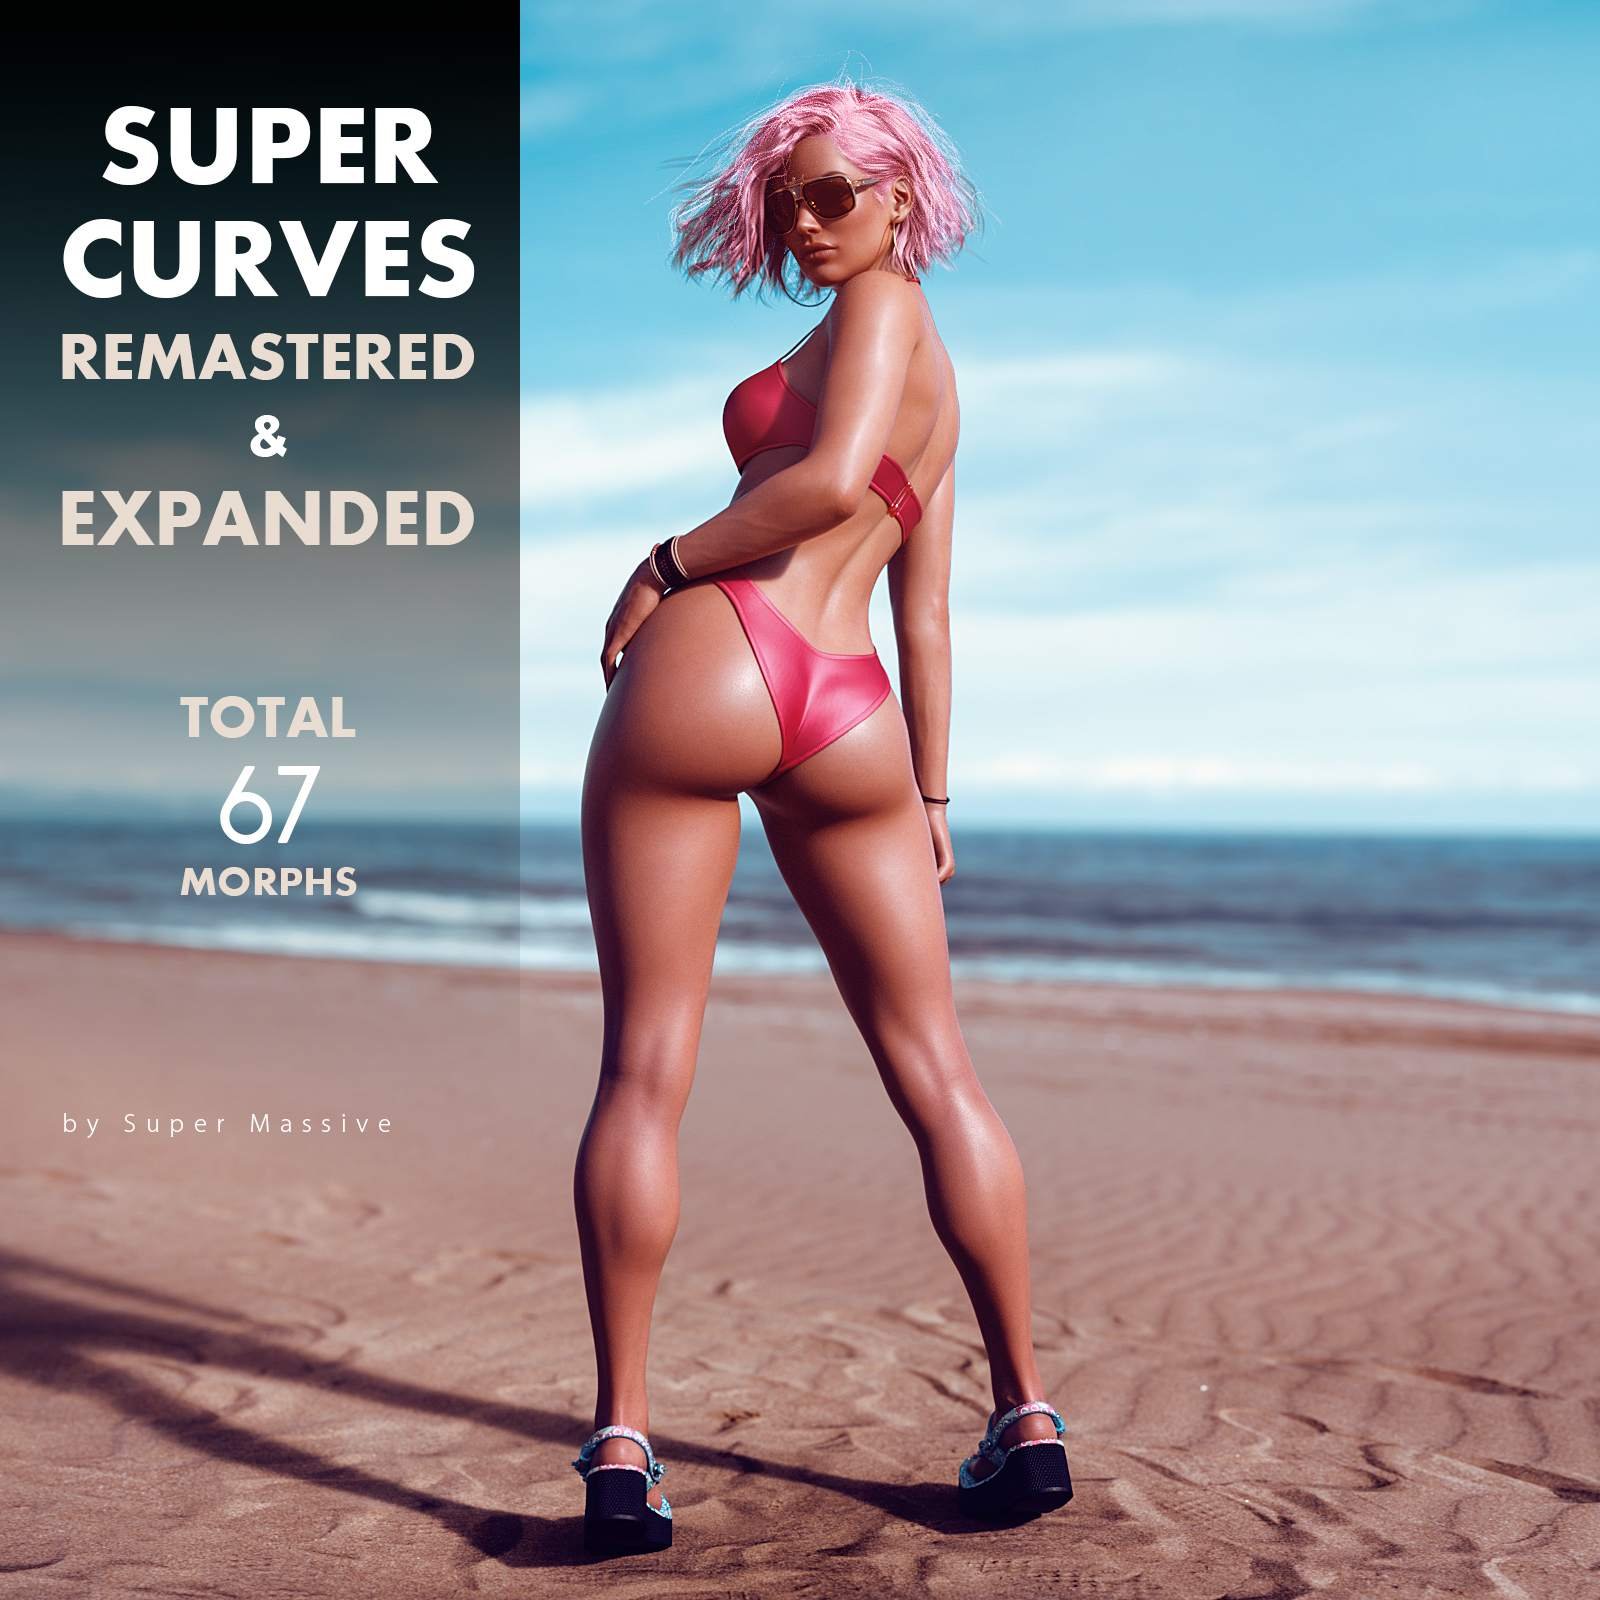 Super Curves Remastered - G8 and 8.1F